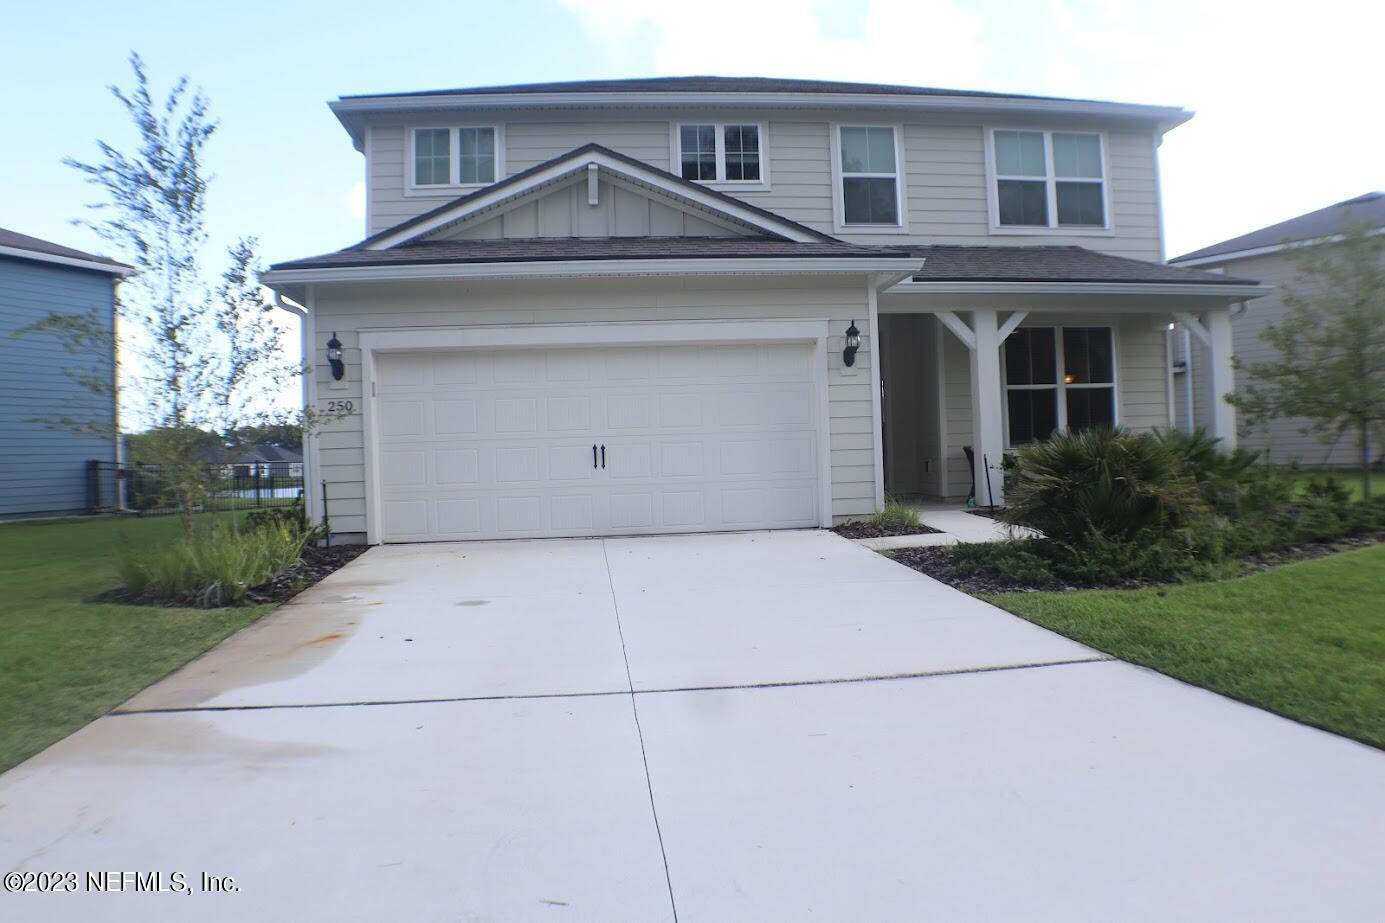 St Augustine, FL home for sale located at 250 Myrtle Oak Court, St Augustine, FL 32092